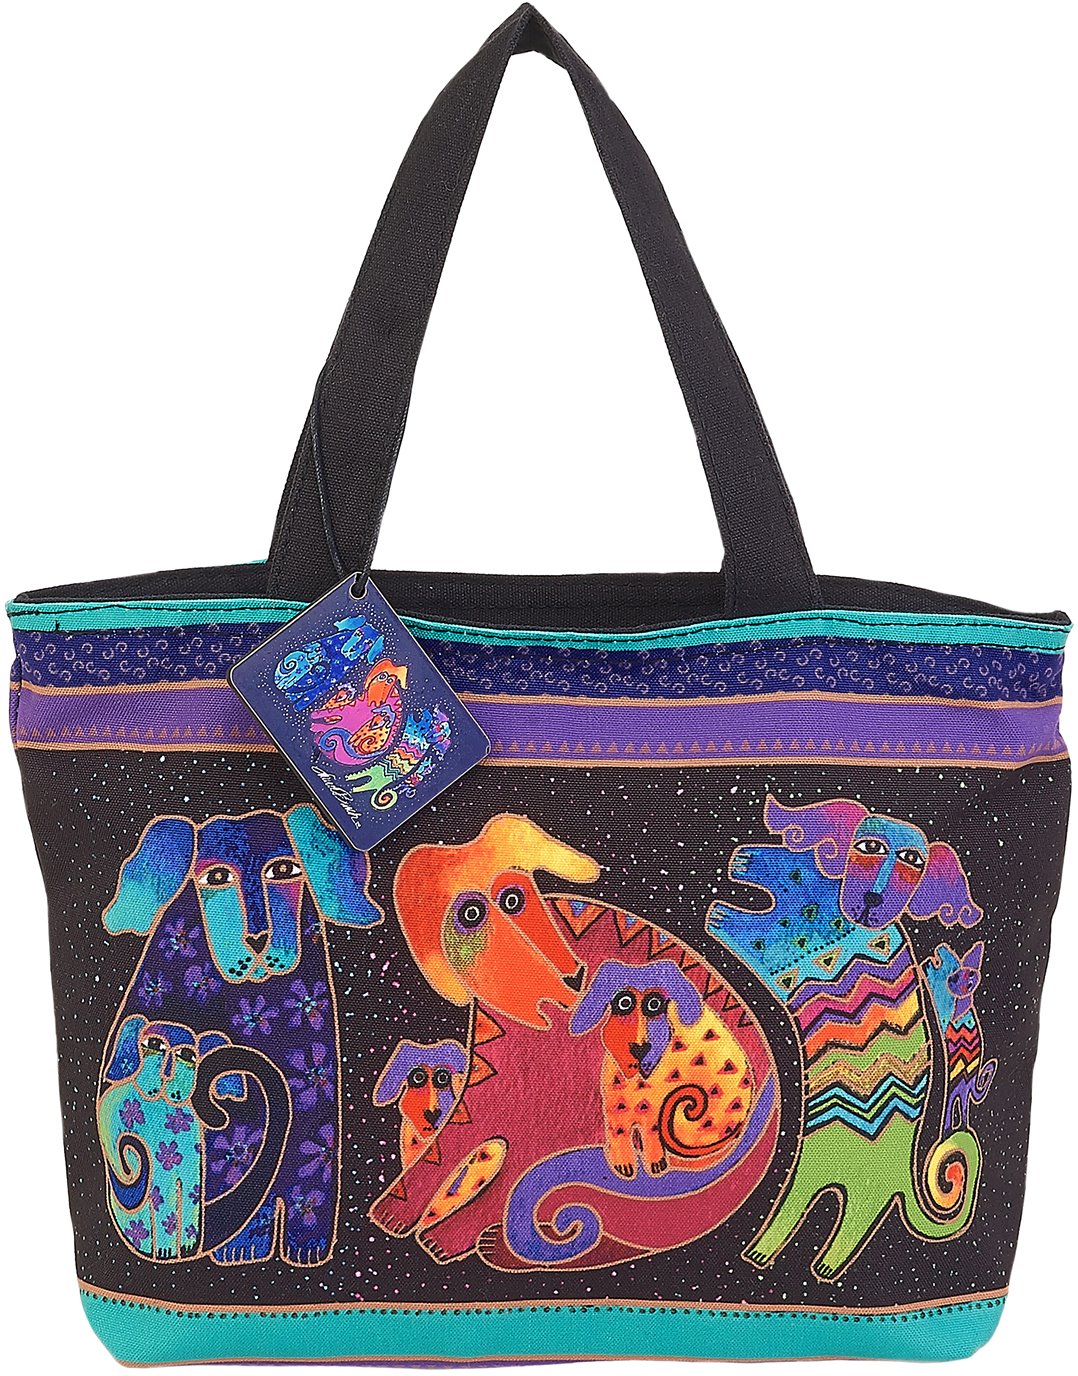 Dogs & Doggies Large Shoulder Tote